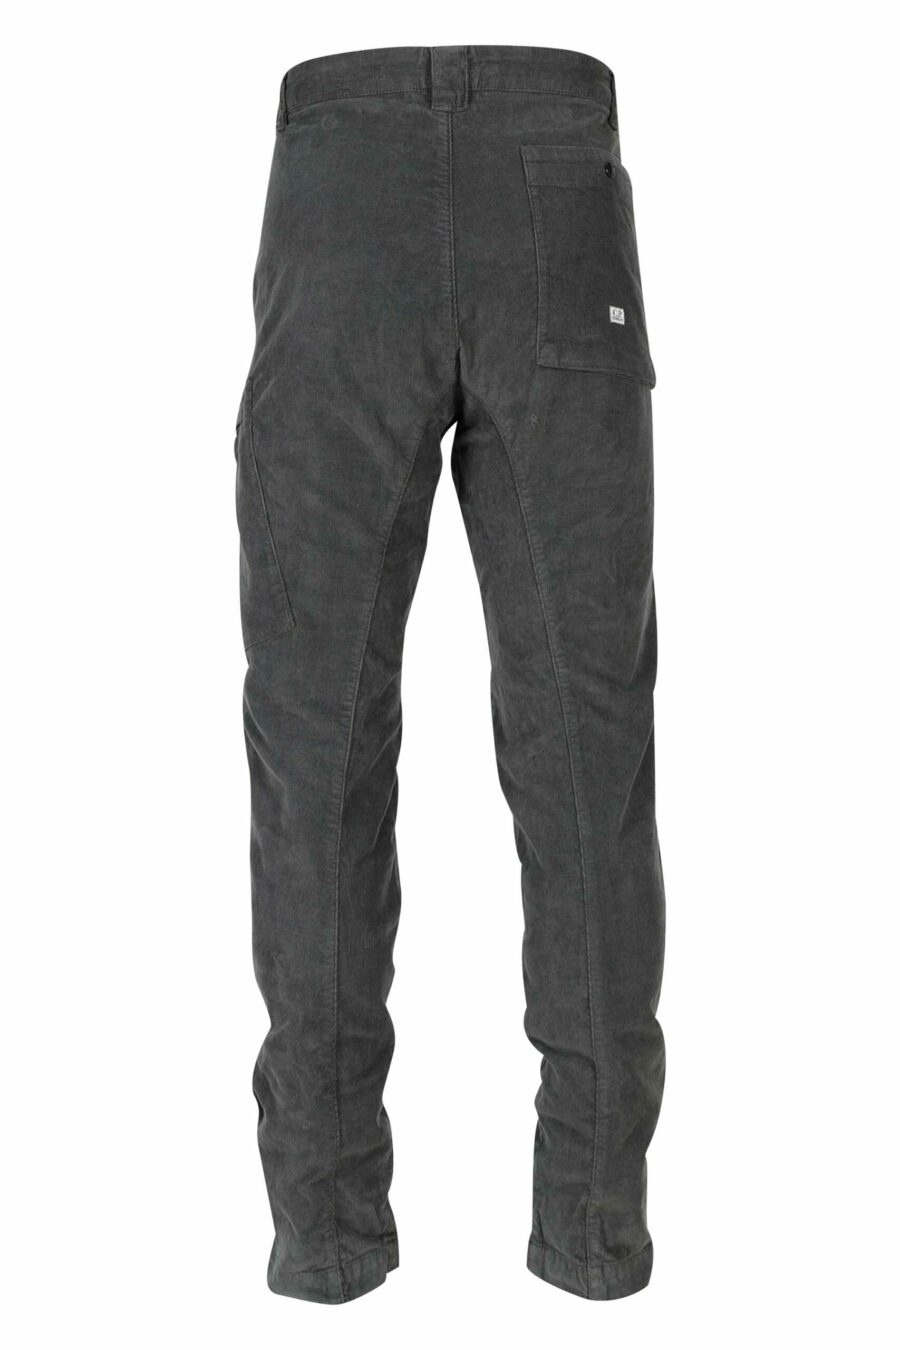 Grey corduroy trousers with side pocket and lens logo - 7620943650693 10 1 scaled